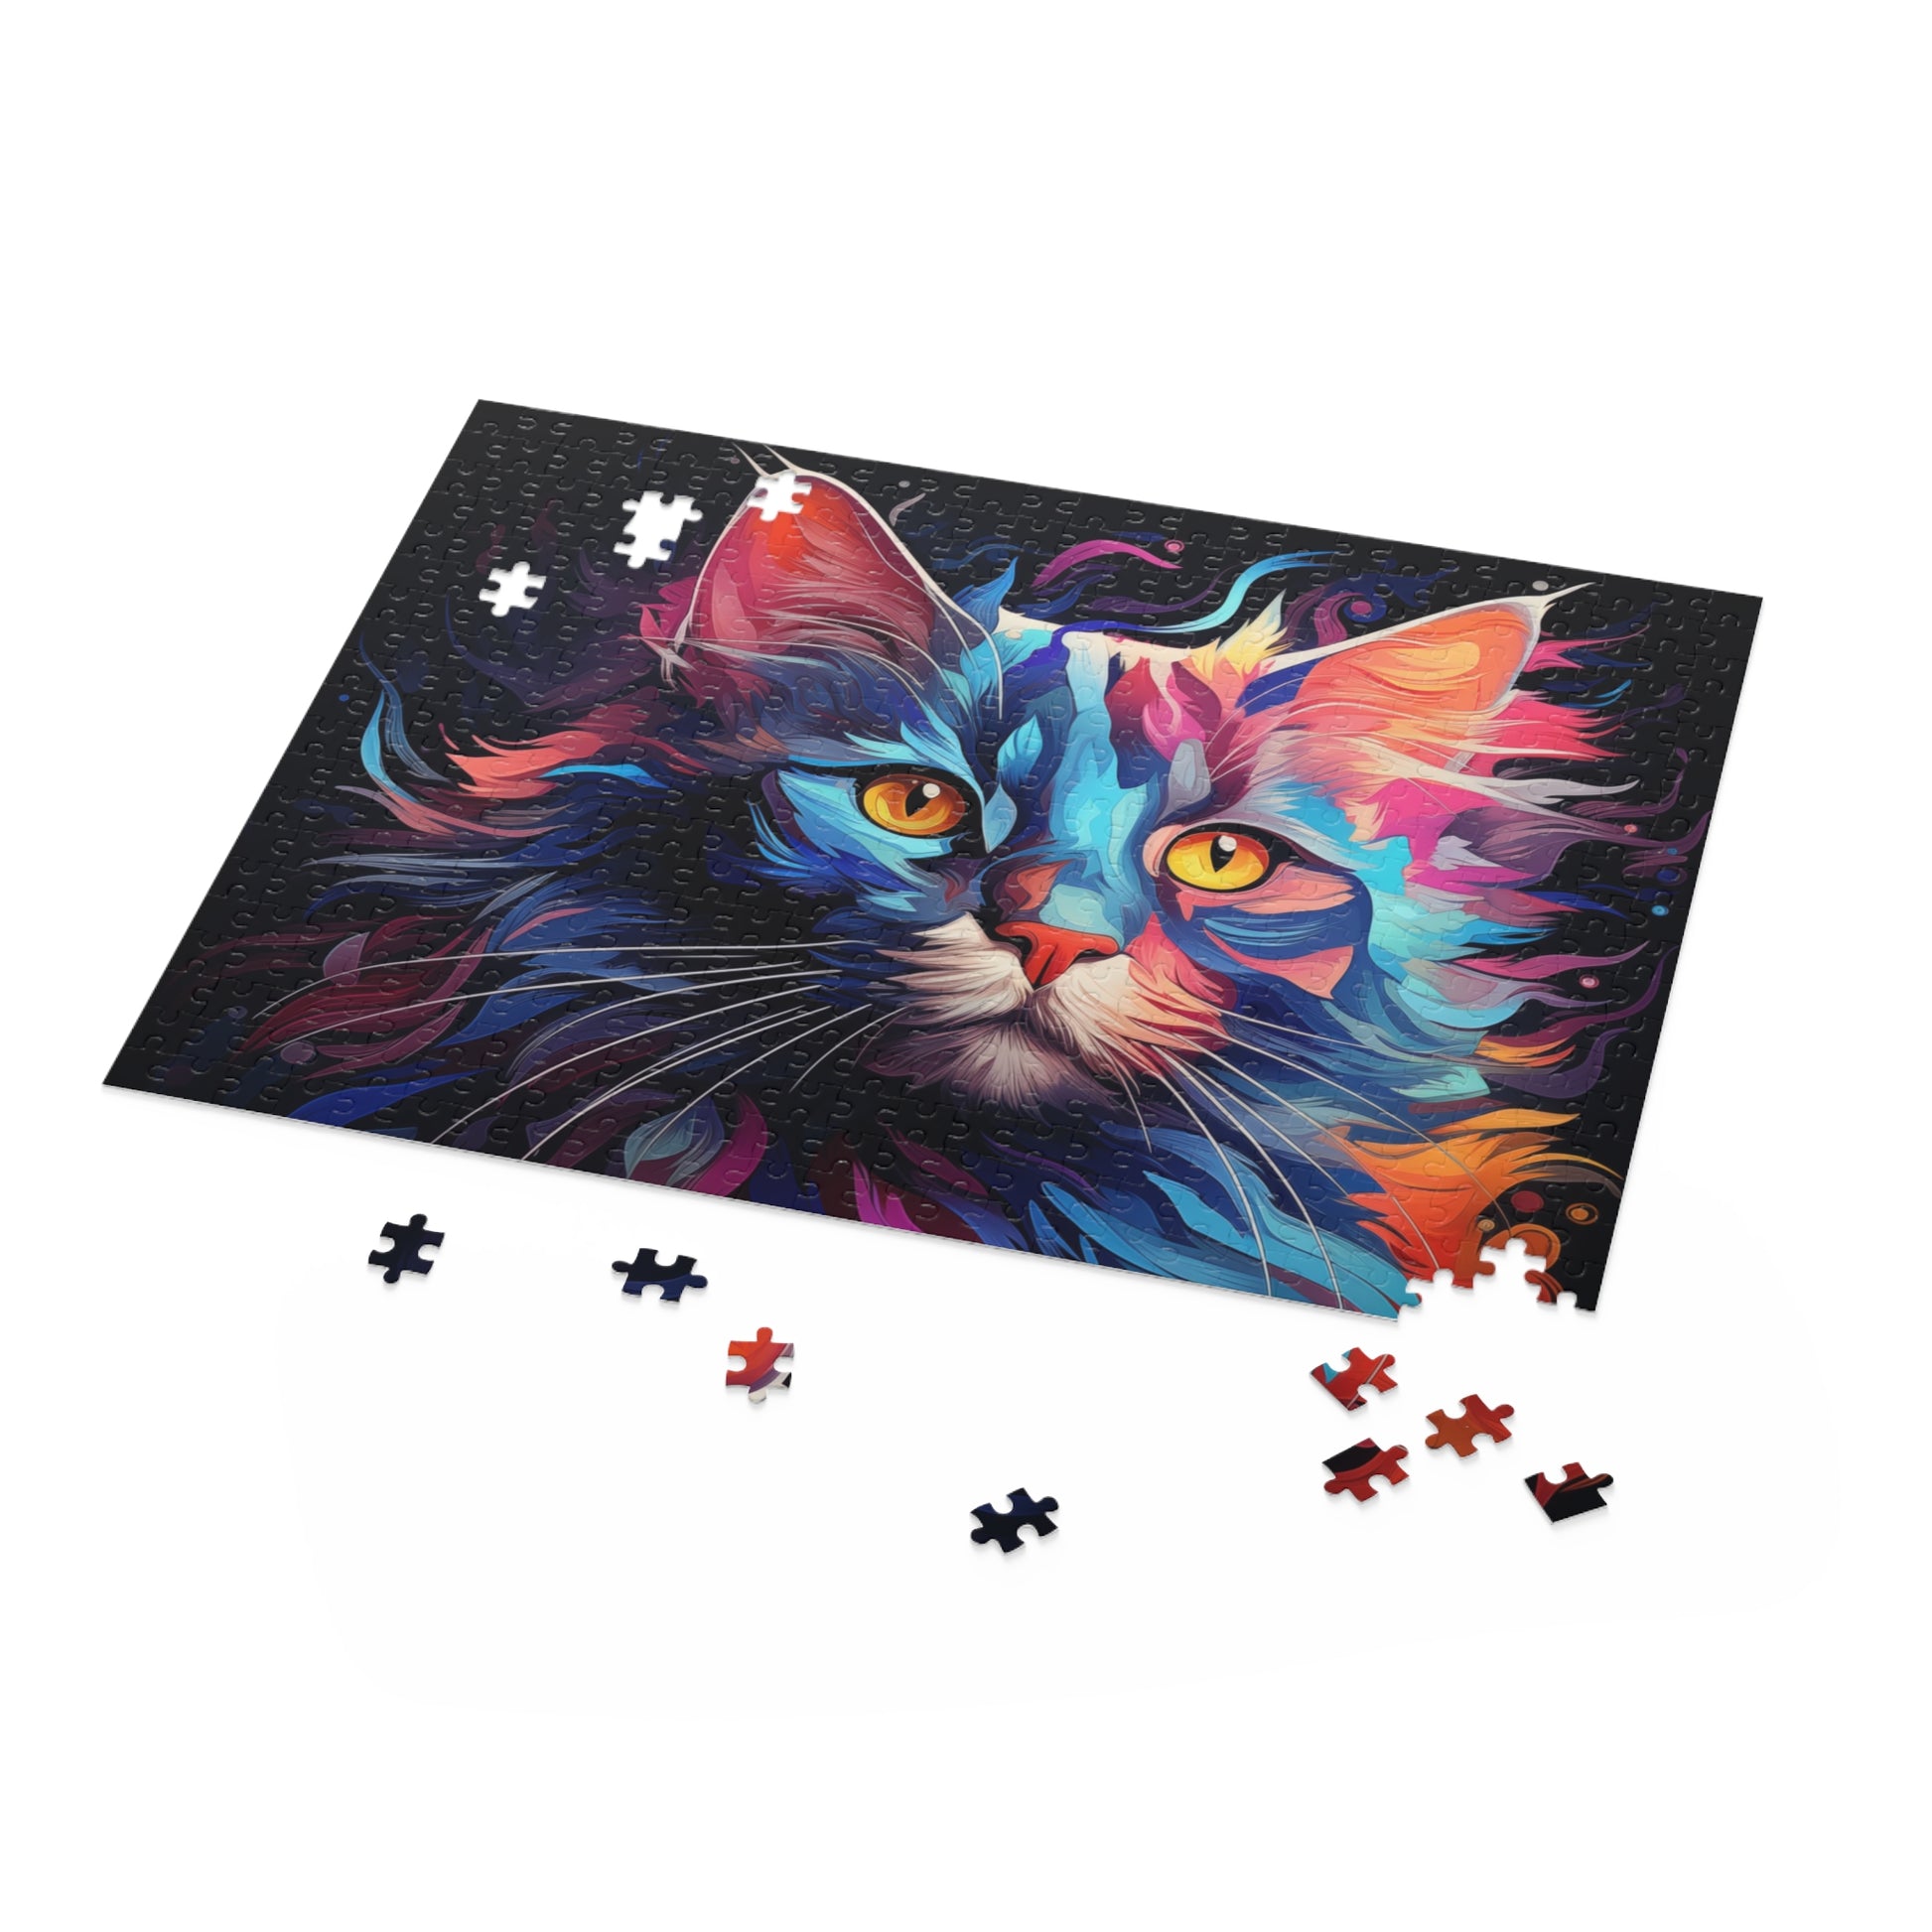 Abstract Cat Oil Paint Jigsaw Puzzle Adult Birthday Business Jigsaw Puzzle Gift for Him Funny Humorous Indoor Outdoor Game Gift For Her Online-5